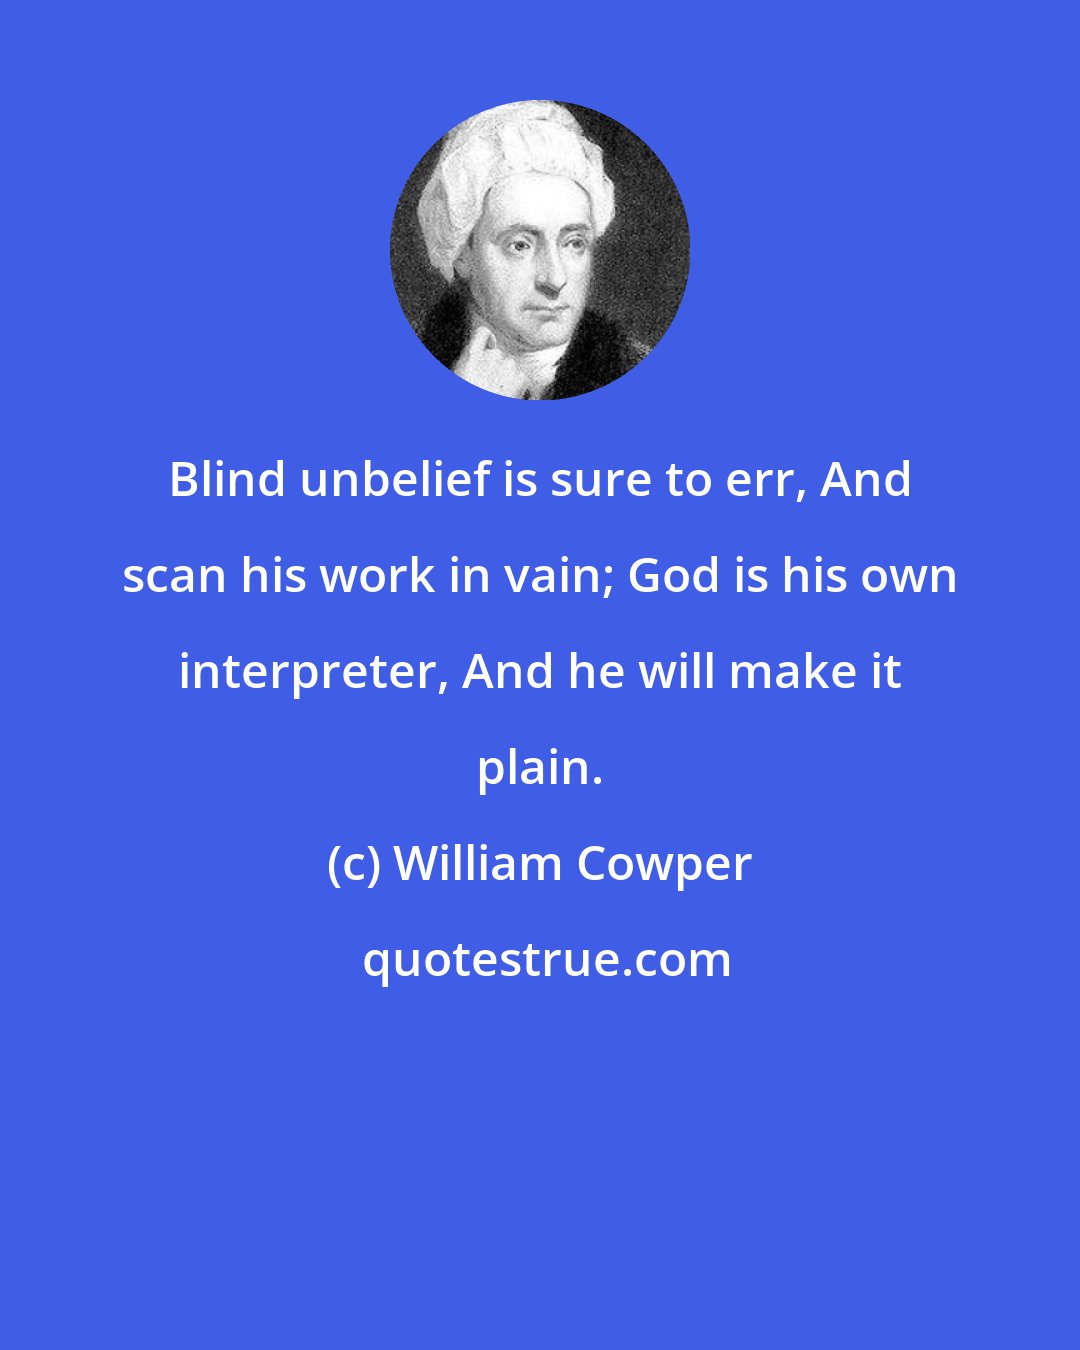 William Cowper: Blind unbelief is sure to err, And scan his work in vain; God is his own interpreter, And he will make it plain.